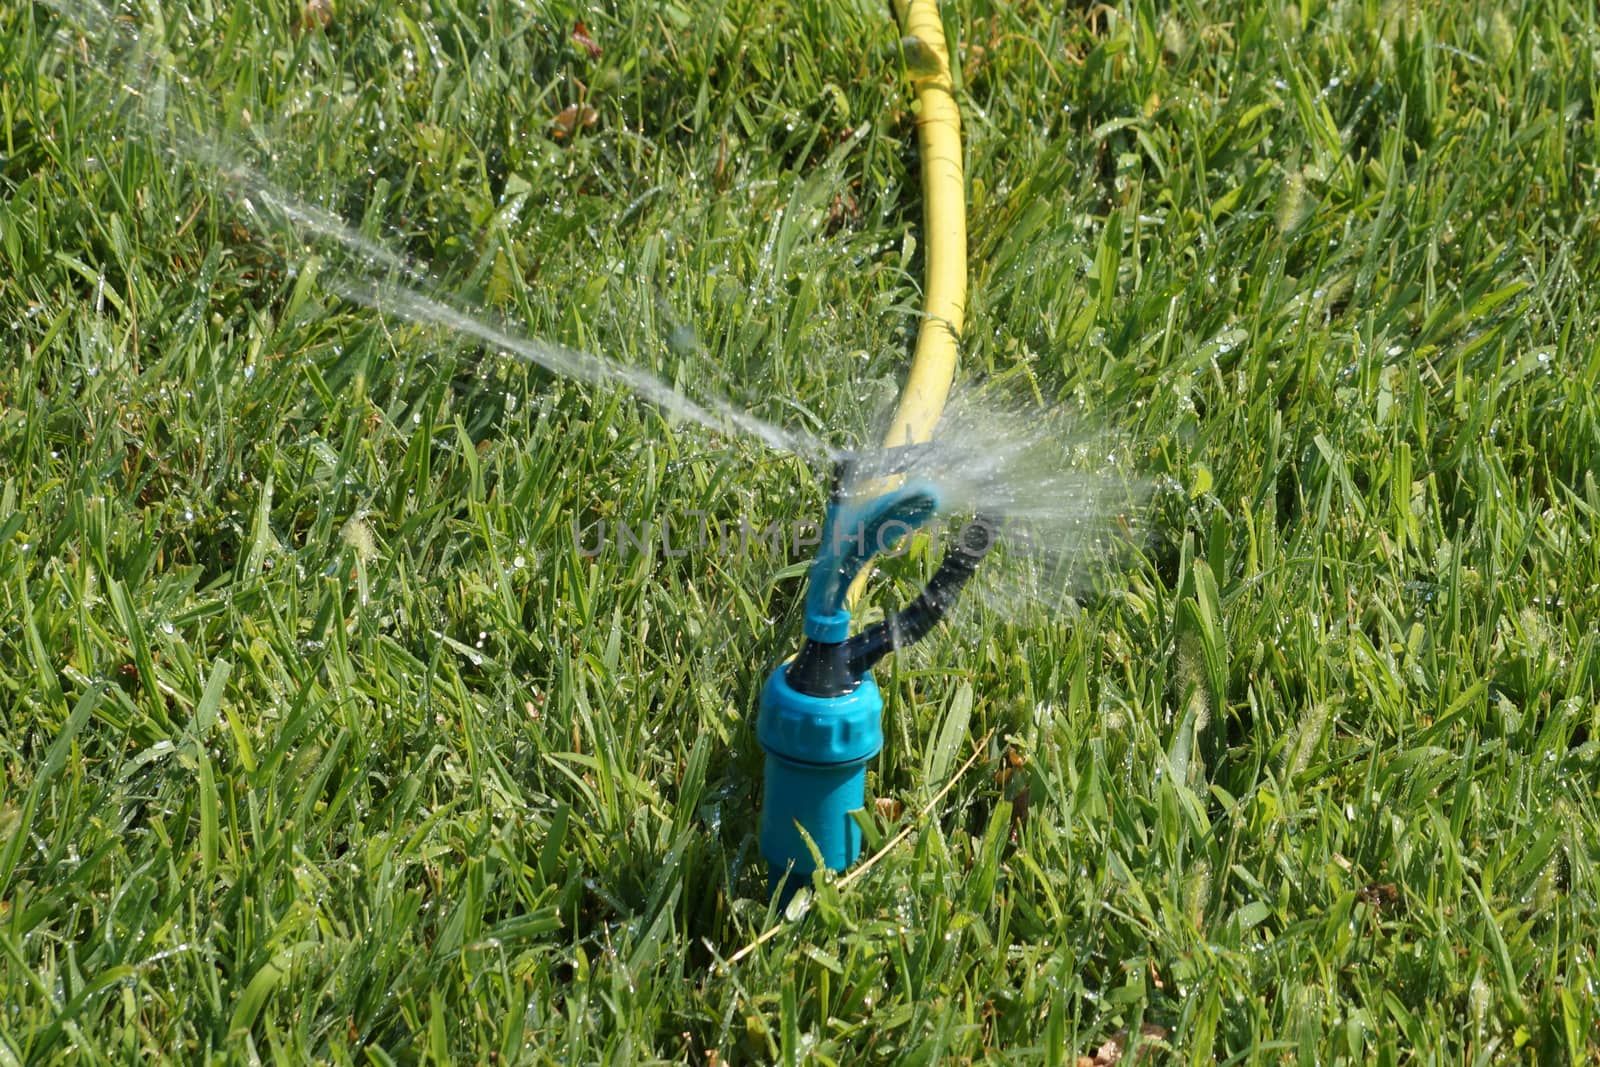 automatic watering the lawn in the park close-up